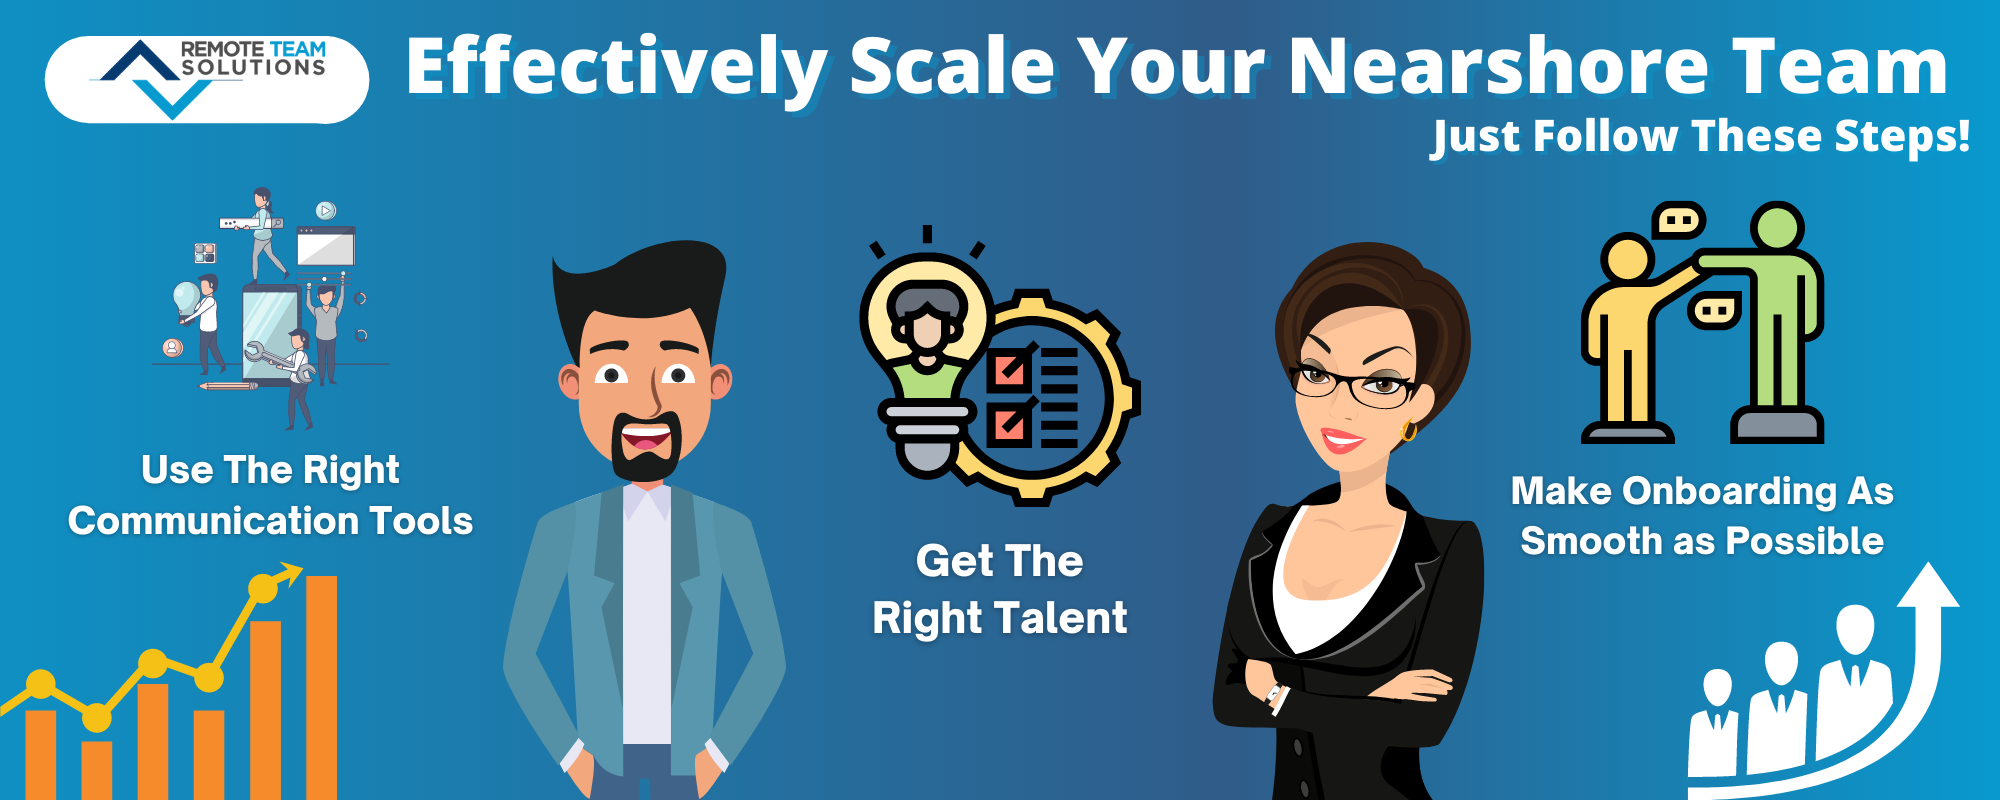 Infographic explaining how to effectively scale nearshore teams